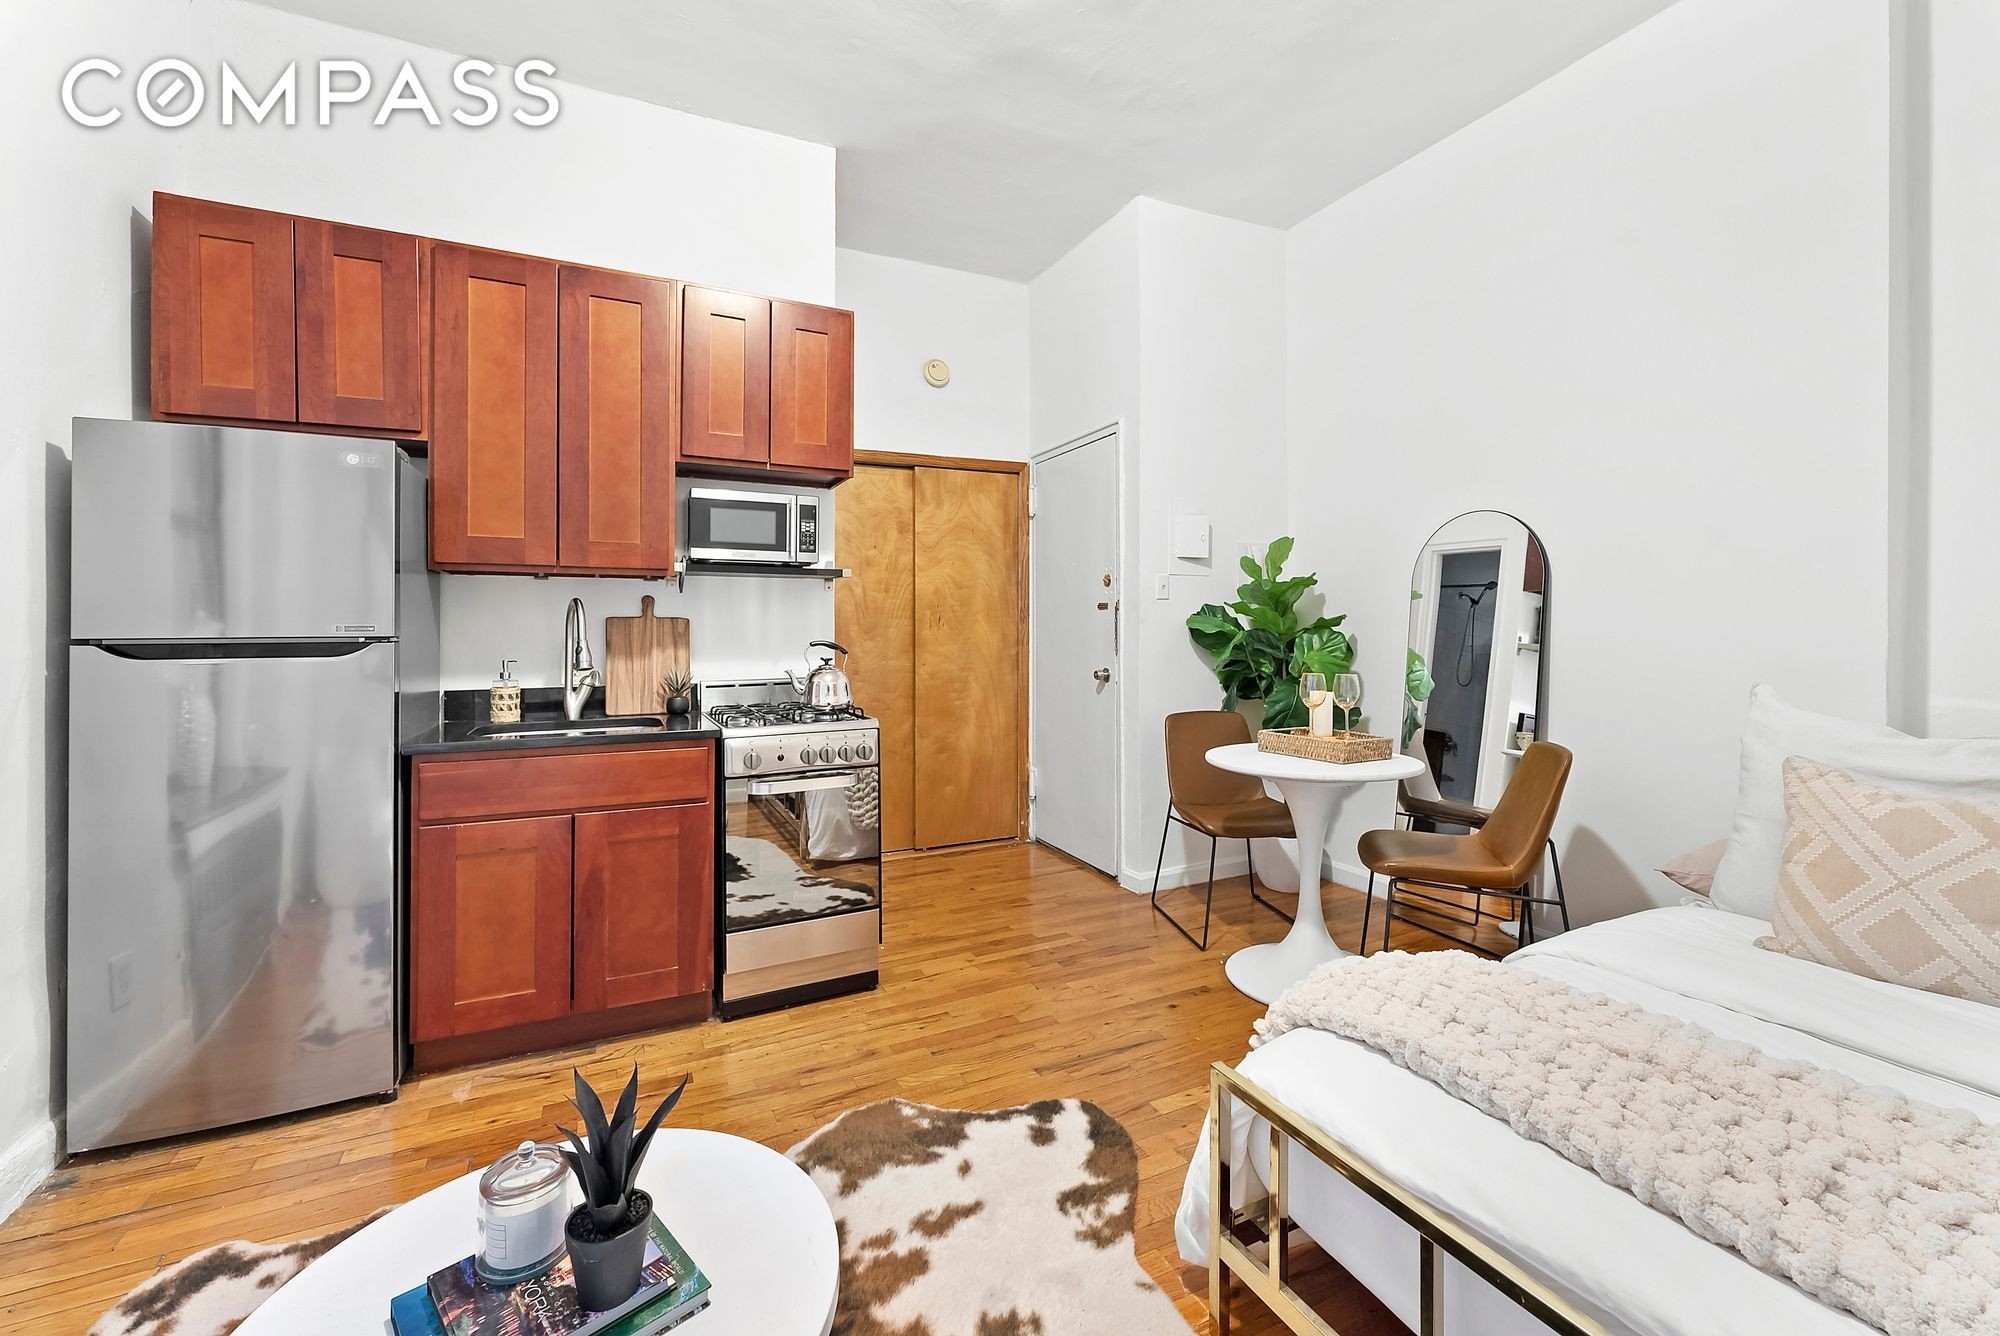 Co-op Properties for Sale at 102 W 80TH ST, 17 Upper West Side, New York, New York 10024